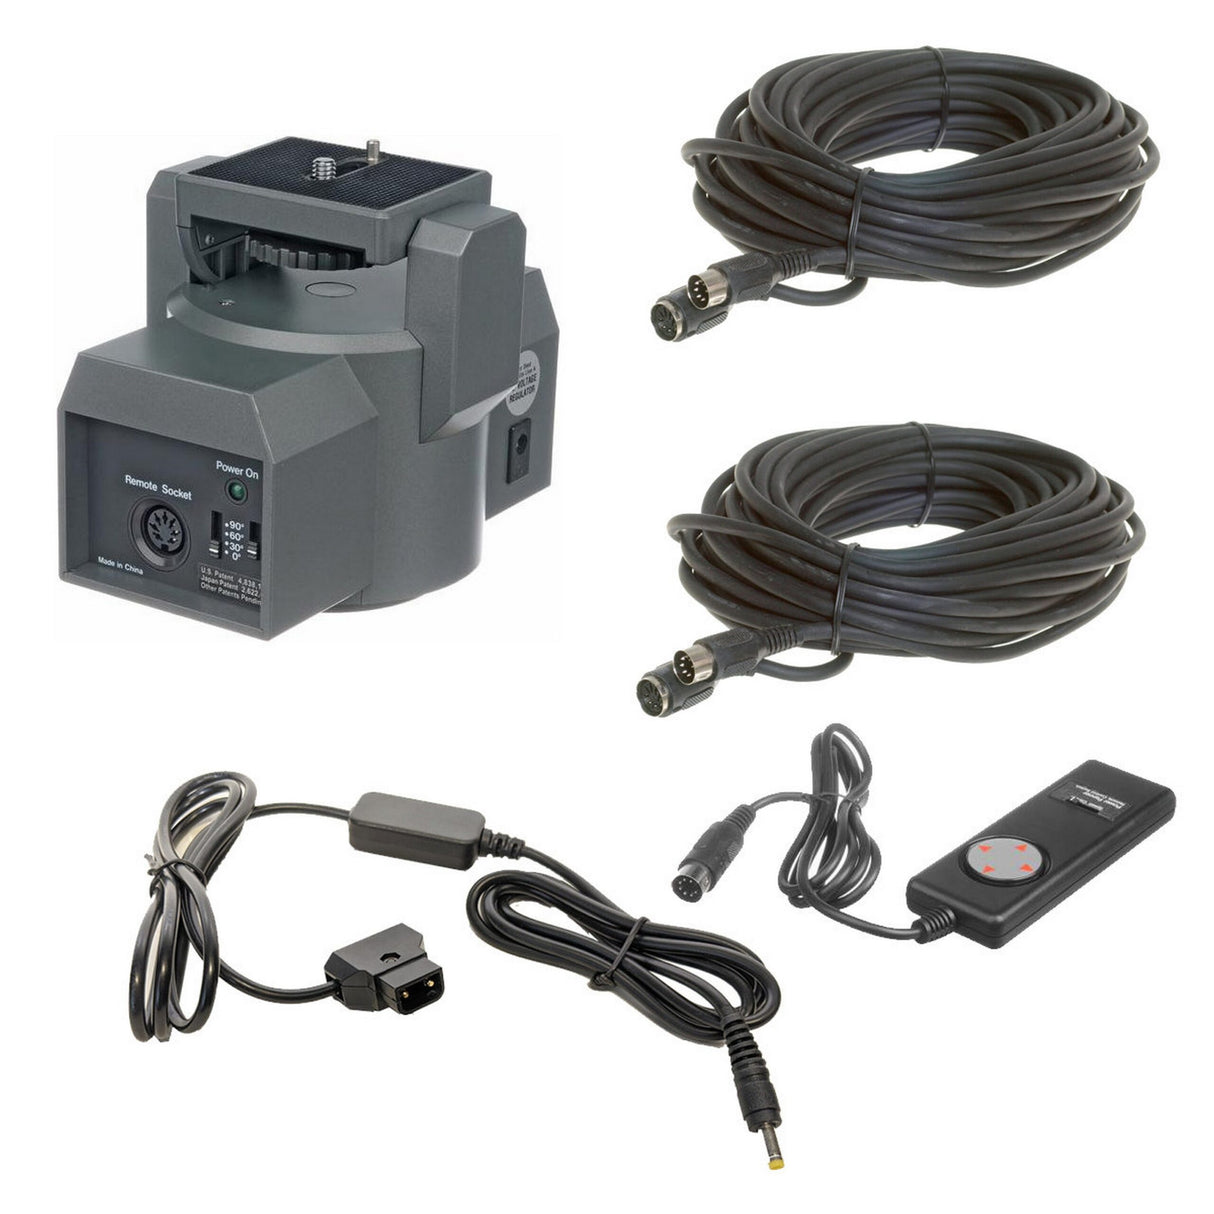 Bescor MP1DK100 MP101, DTAP Power Adapter Cord Kit and 2 Piece RE50 100 Foot Remote Extension Cord